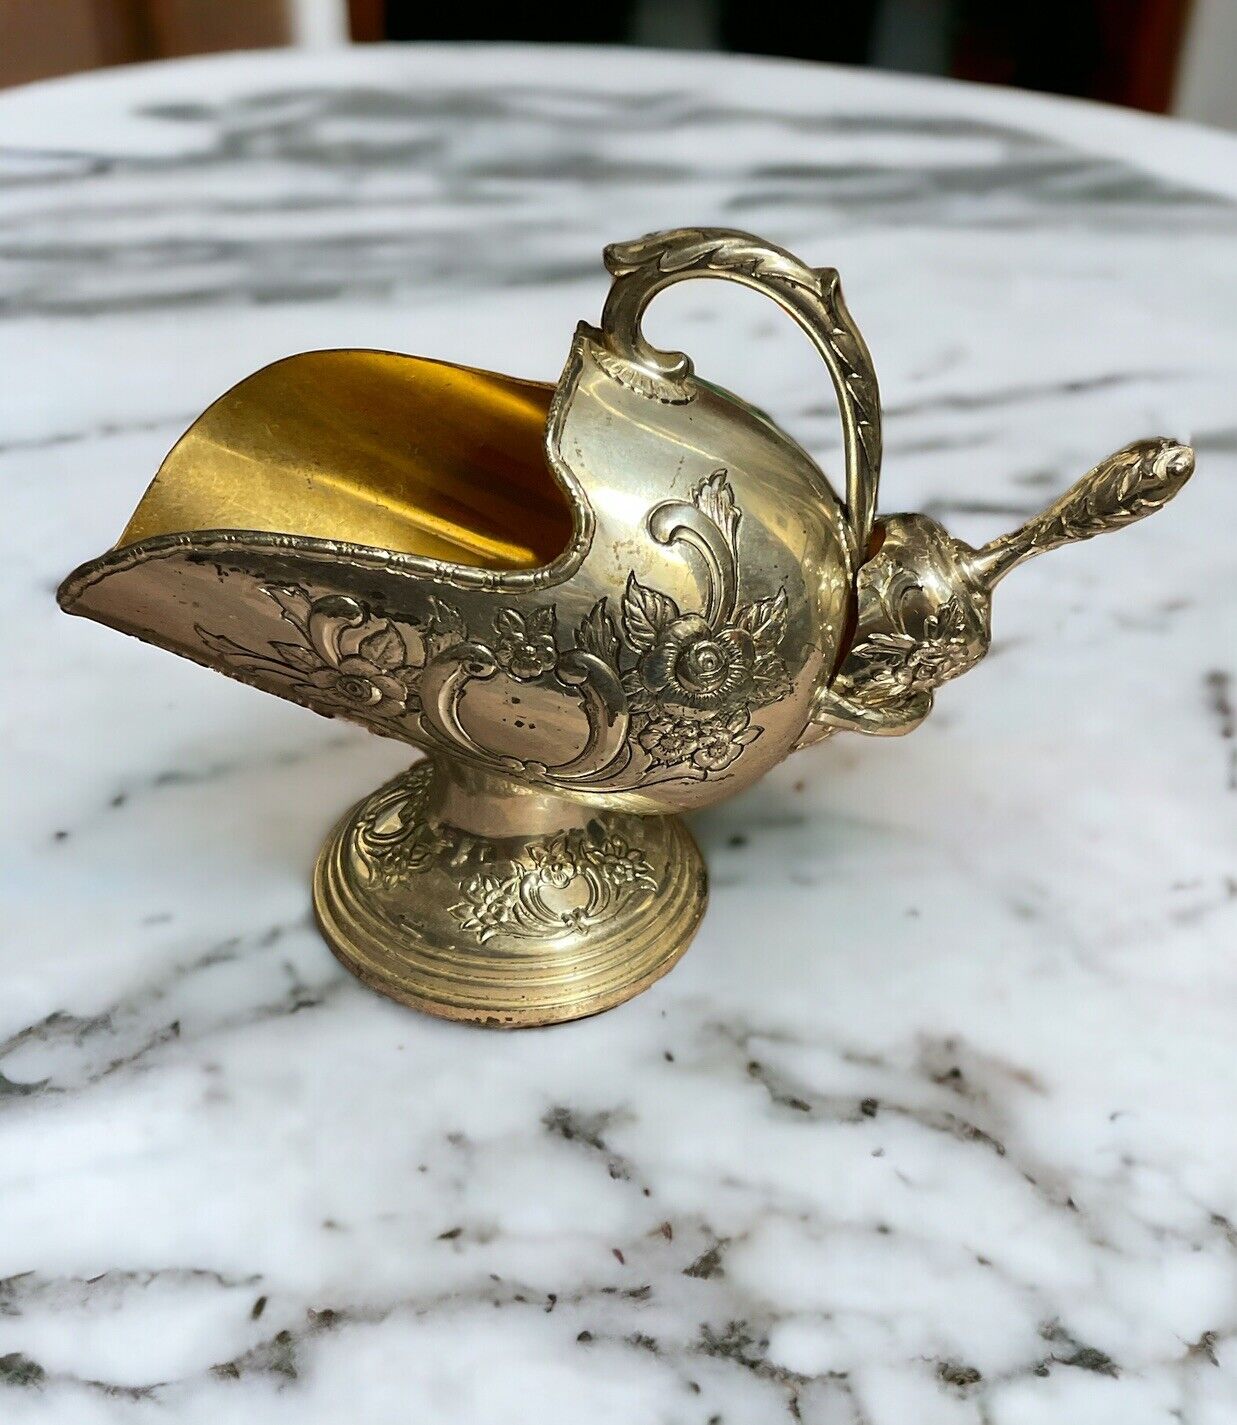 Vintage Raimond Silver Plated Sugar Scuttle With Scoop 40s/50s Decor